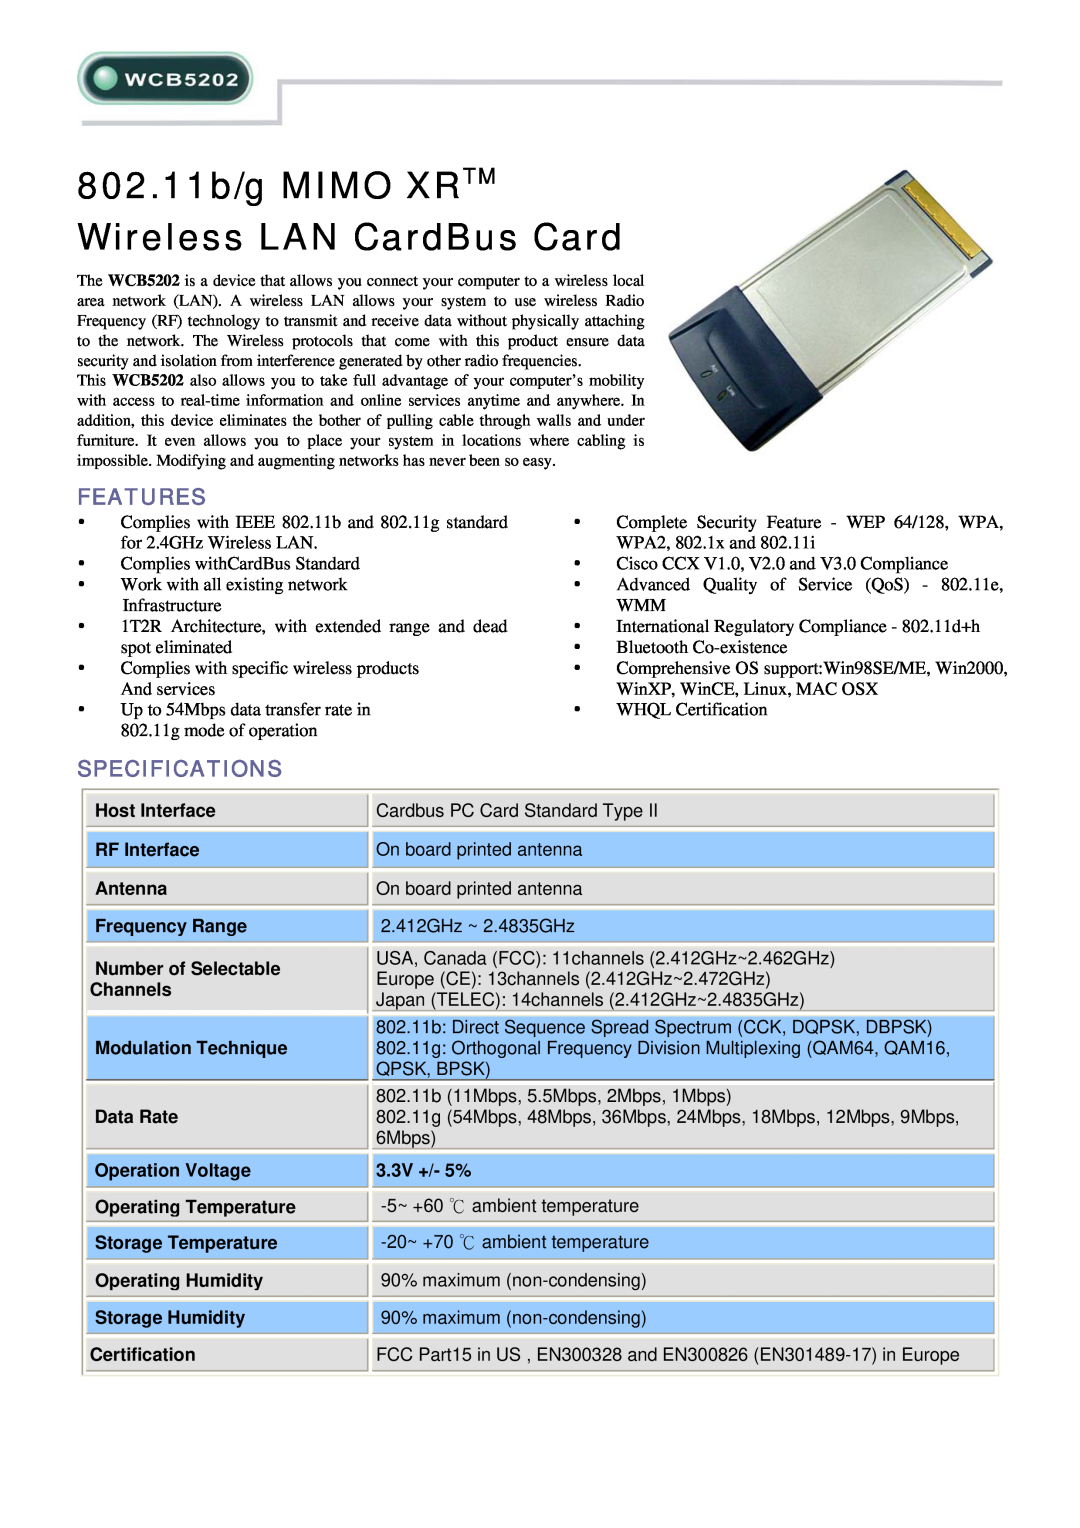 Abocom WCB5202 specifications 802.11b/g MIMO XRPTMP Wireless LAN CardBus Card, Features, Specifications, 3.3V +/- 5% 